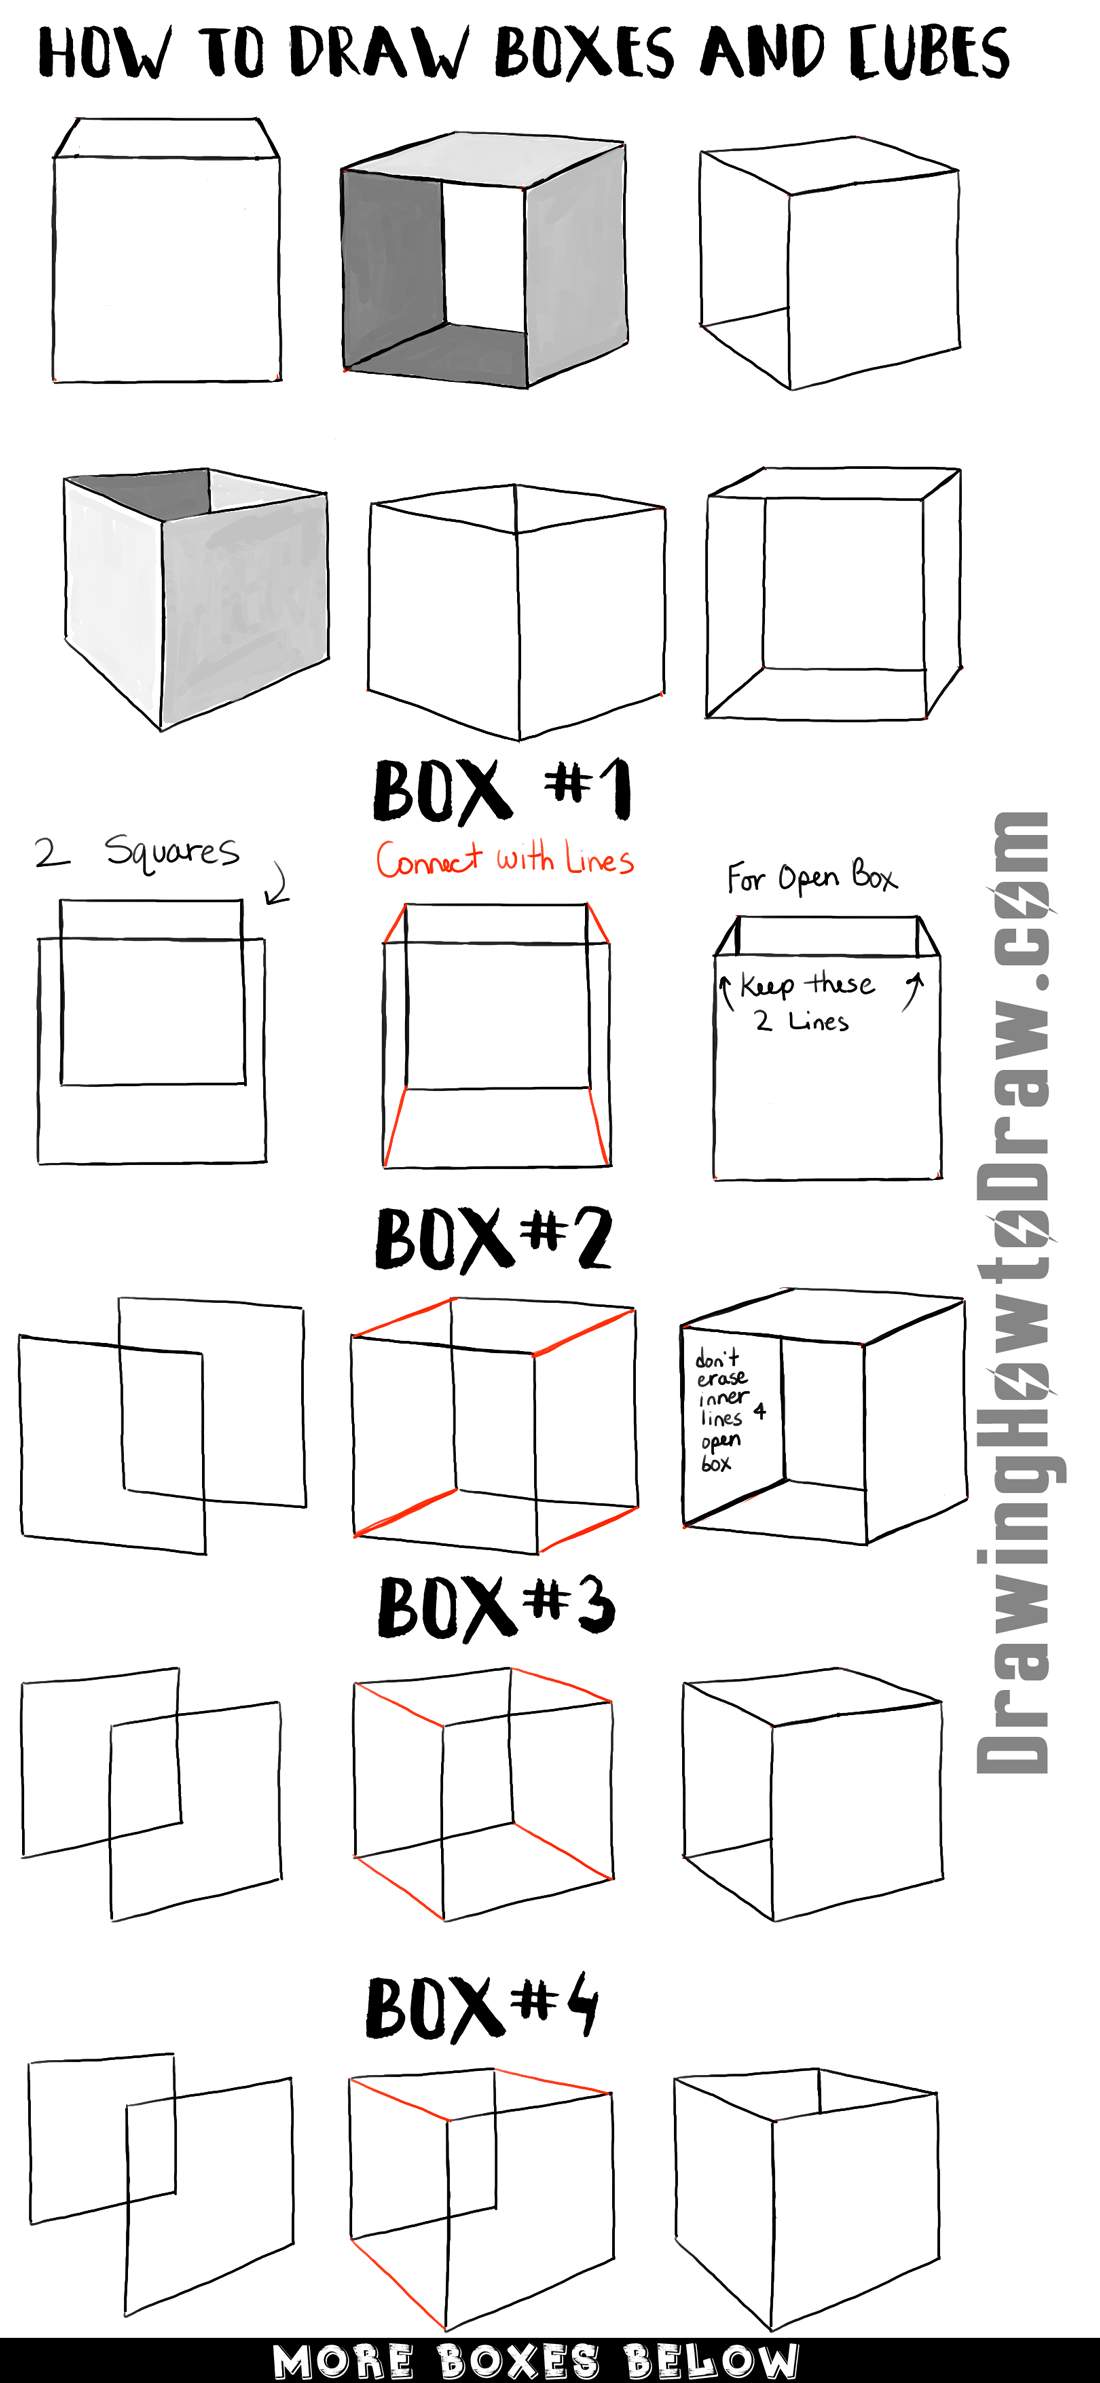 How to Draw Boxes and Cubes and How to Shade Them Step by Step Tutorial